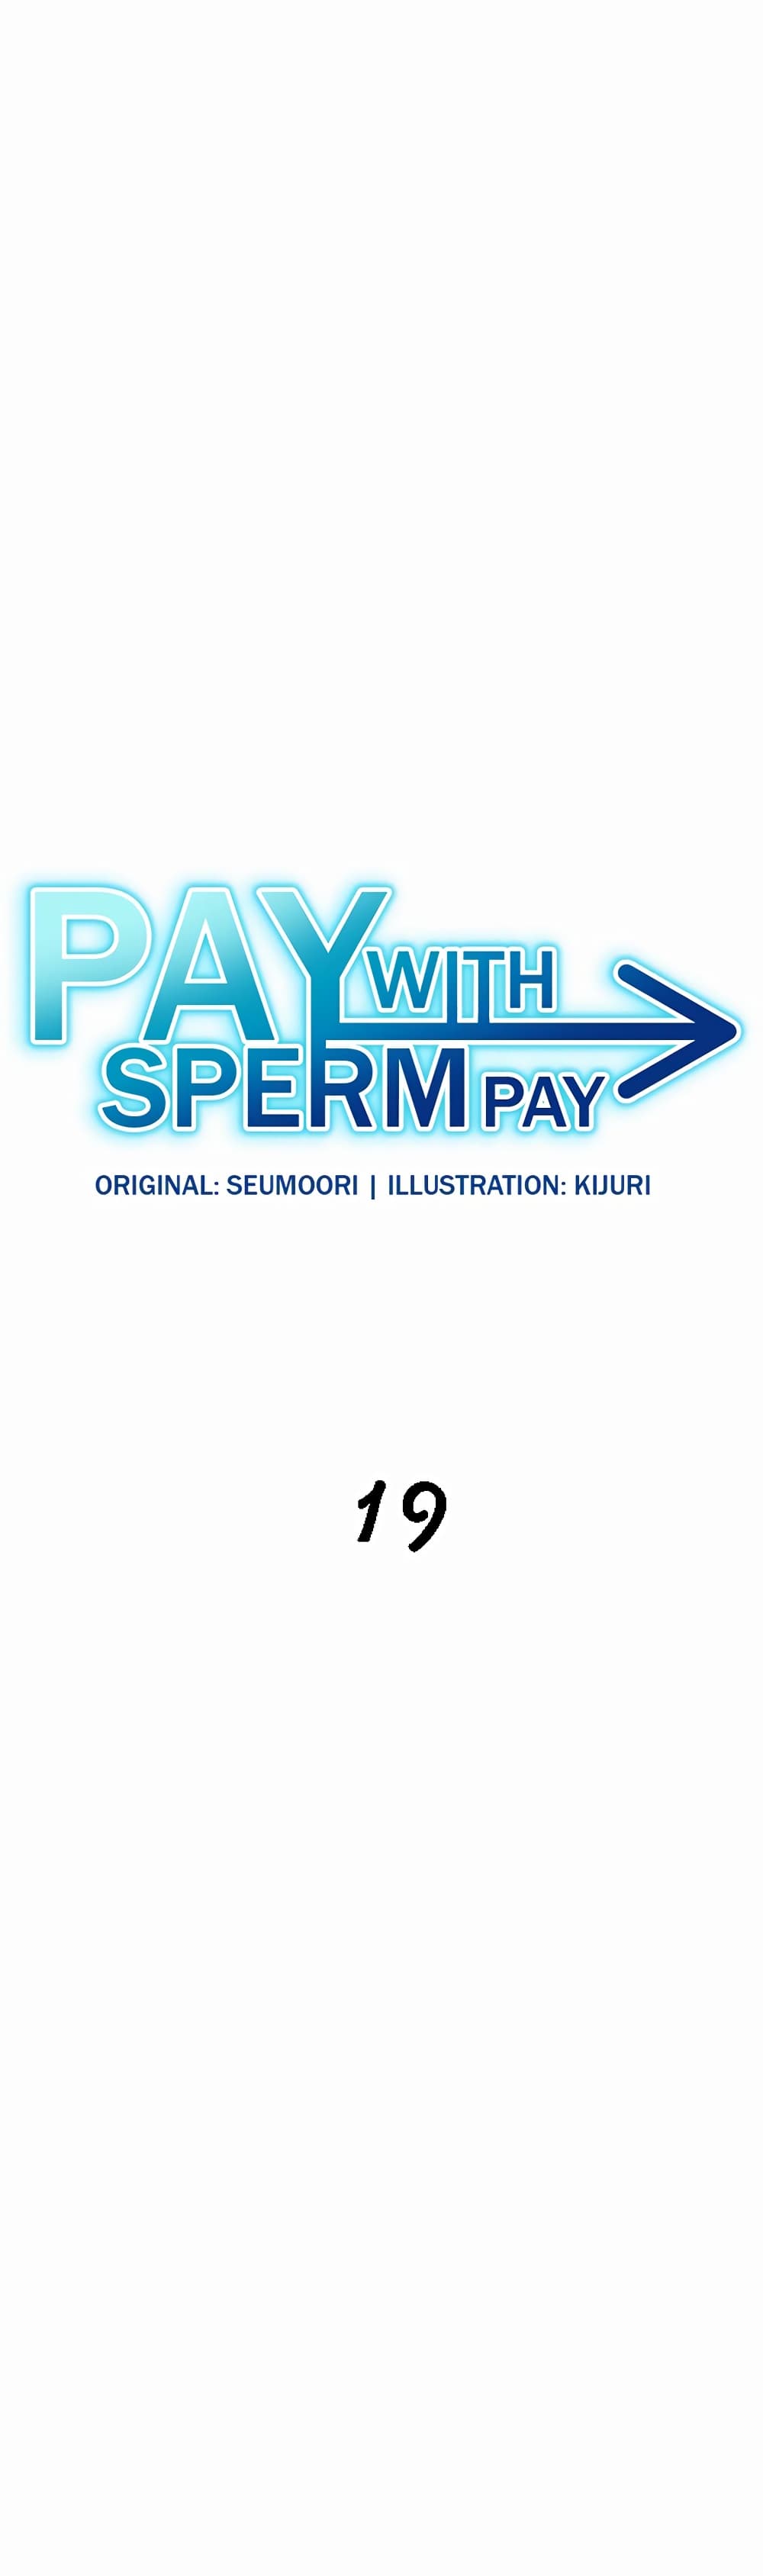 Pay with Sperm Pay 19 (1)